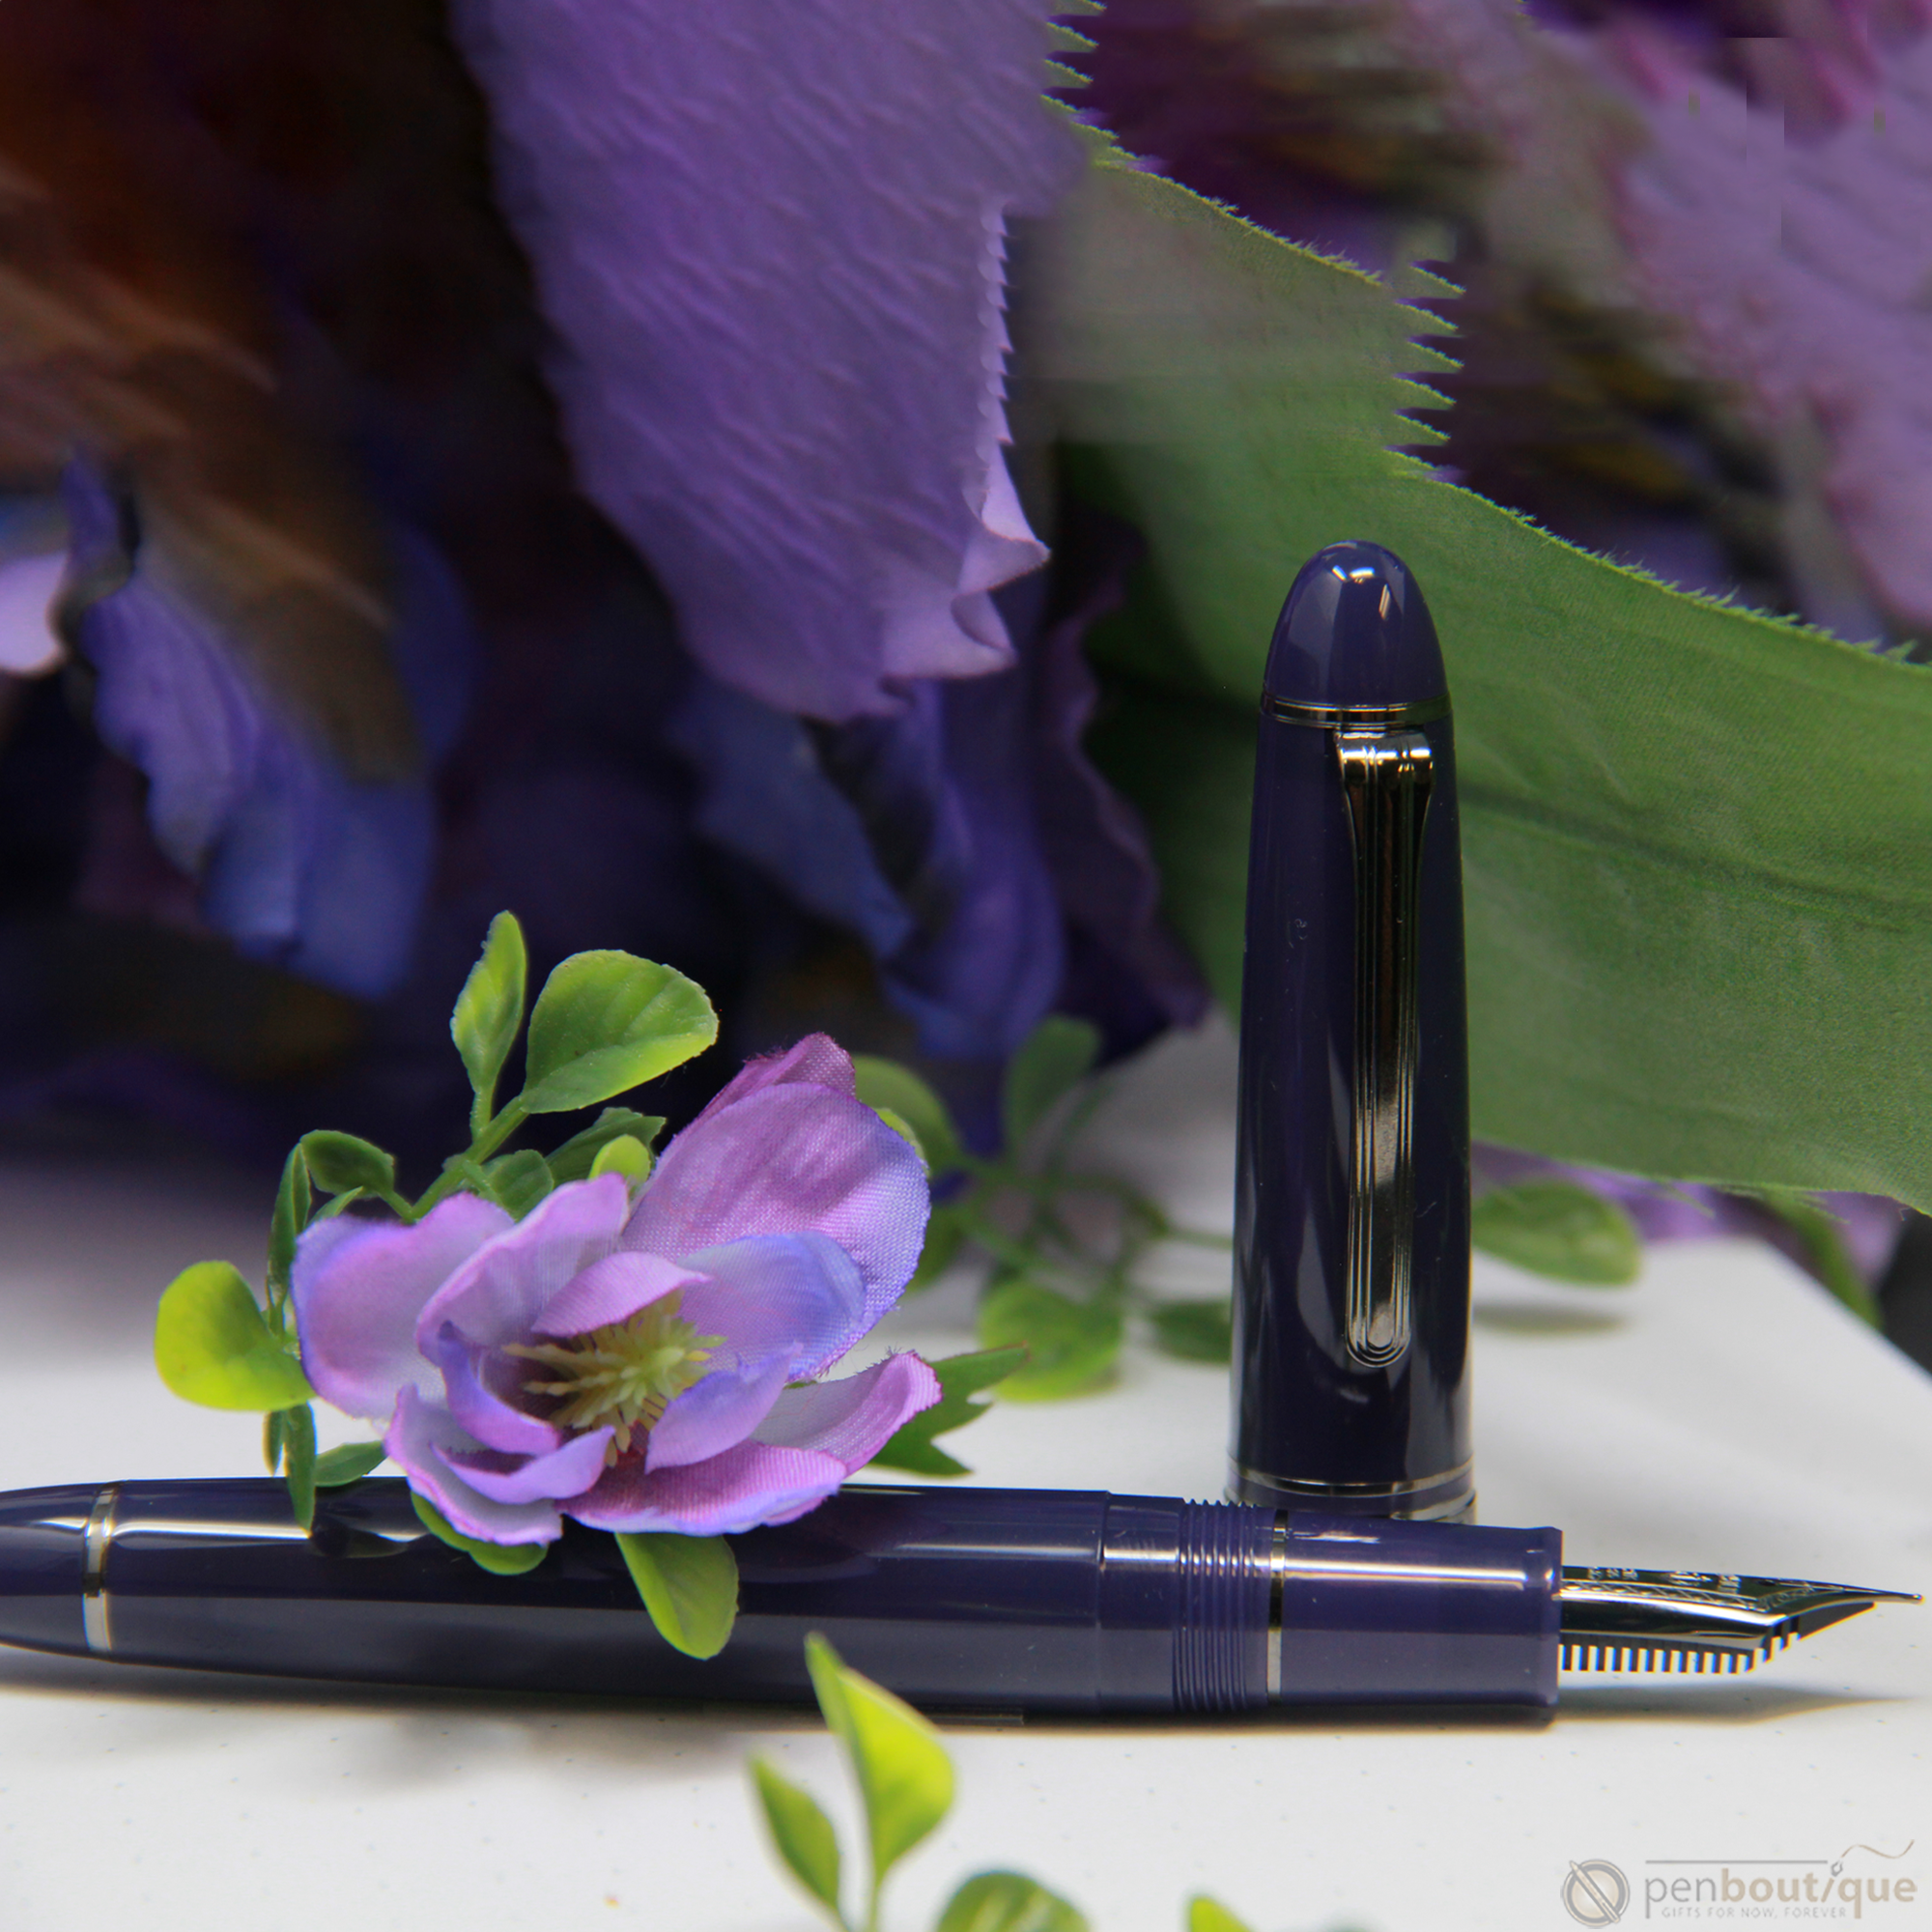 Sailor 1911L Large Fountain Pen - Wicked Witch of the West (North America Exclusive)-Pen Boutique Ltd